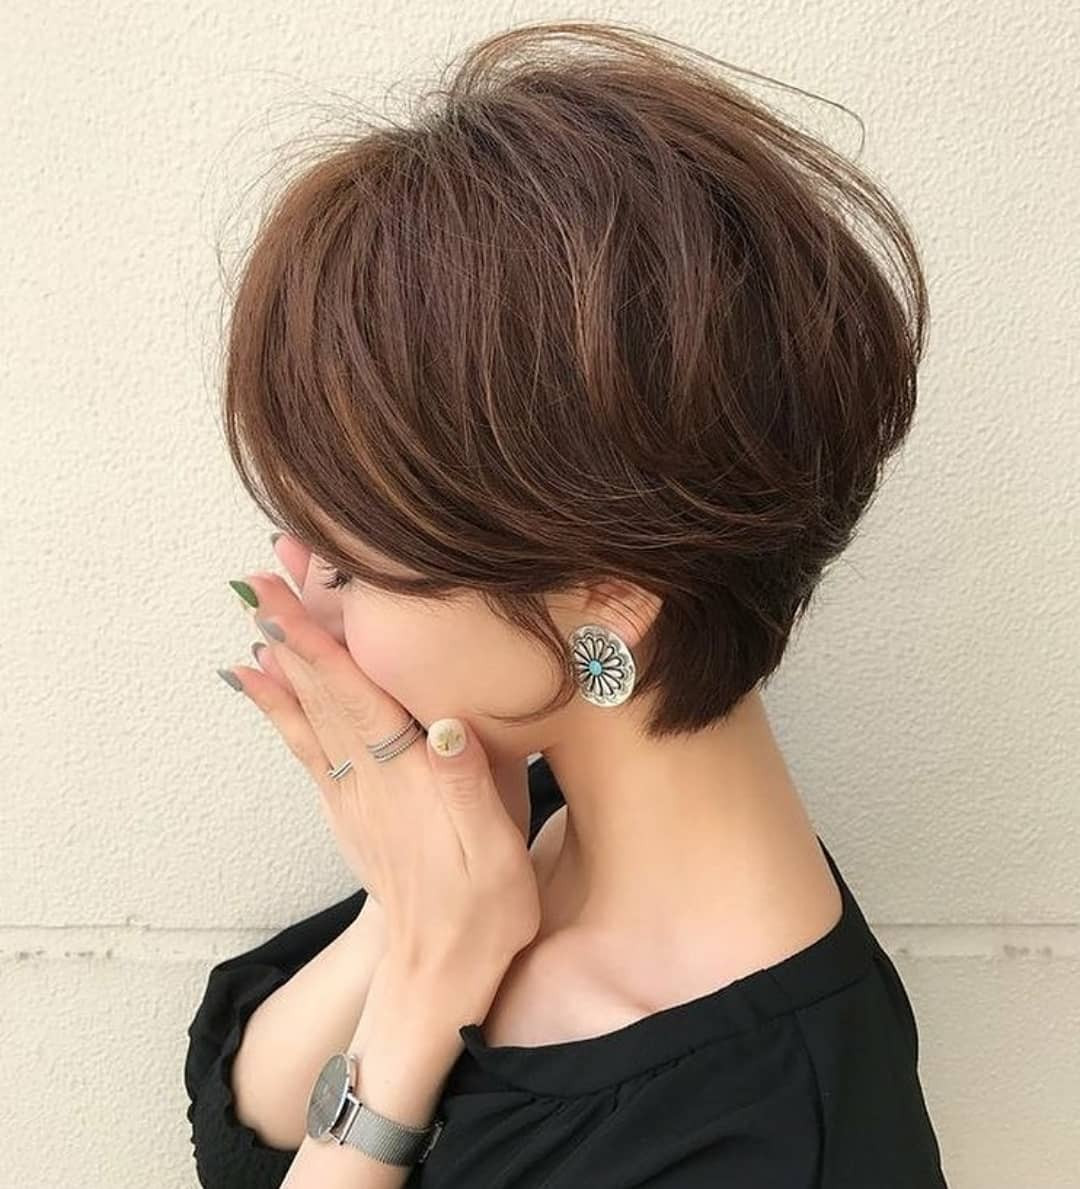 Girls Short Haircuts 2019
 10 Cute Short Hairstyles and Haircuts for Young Girls